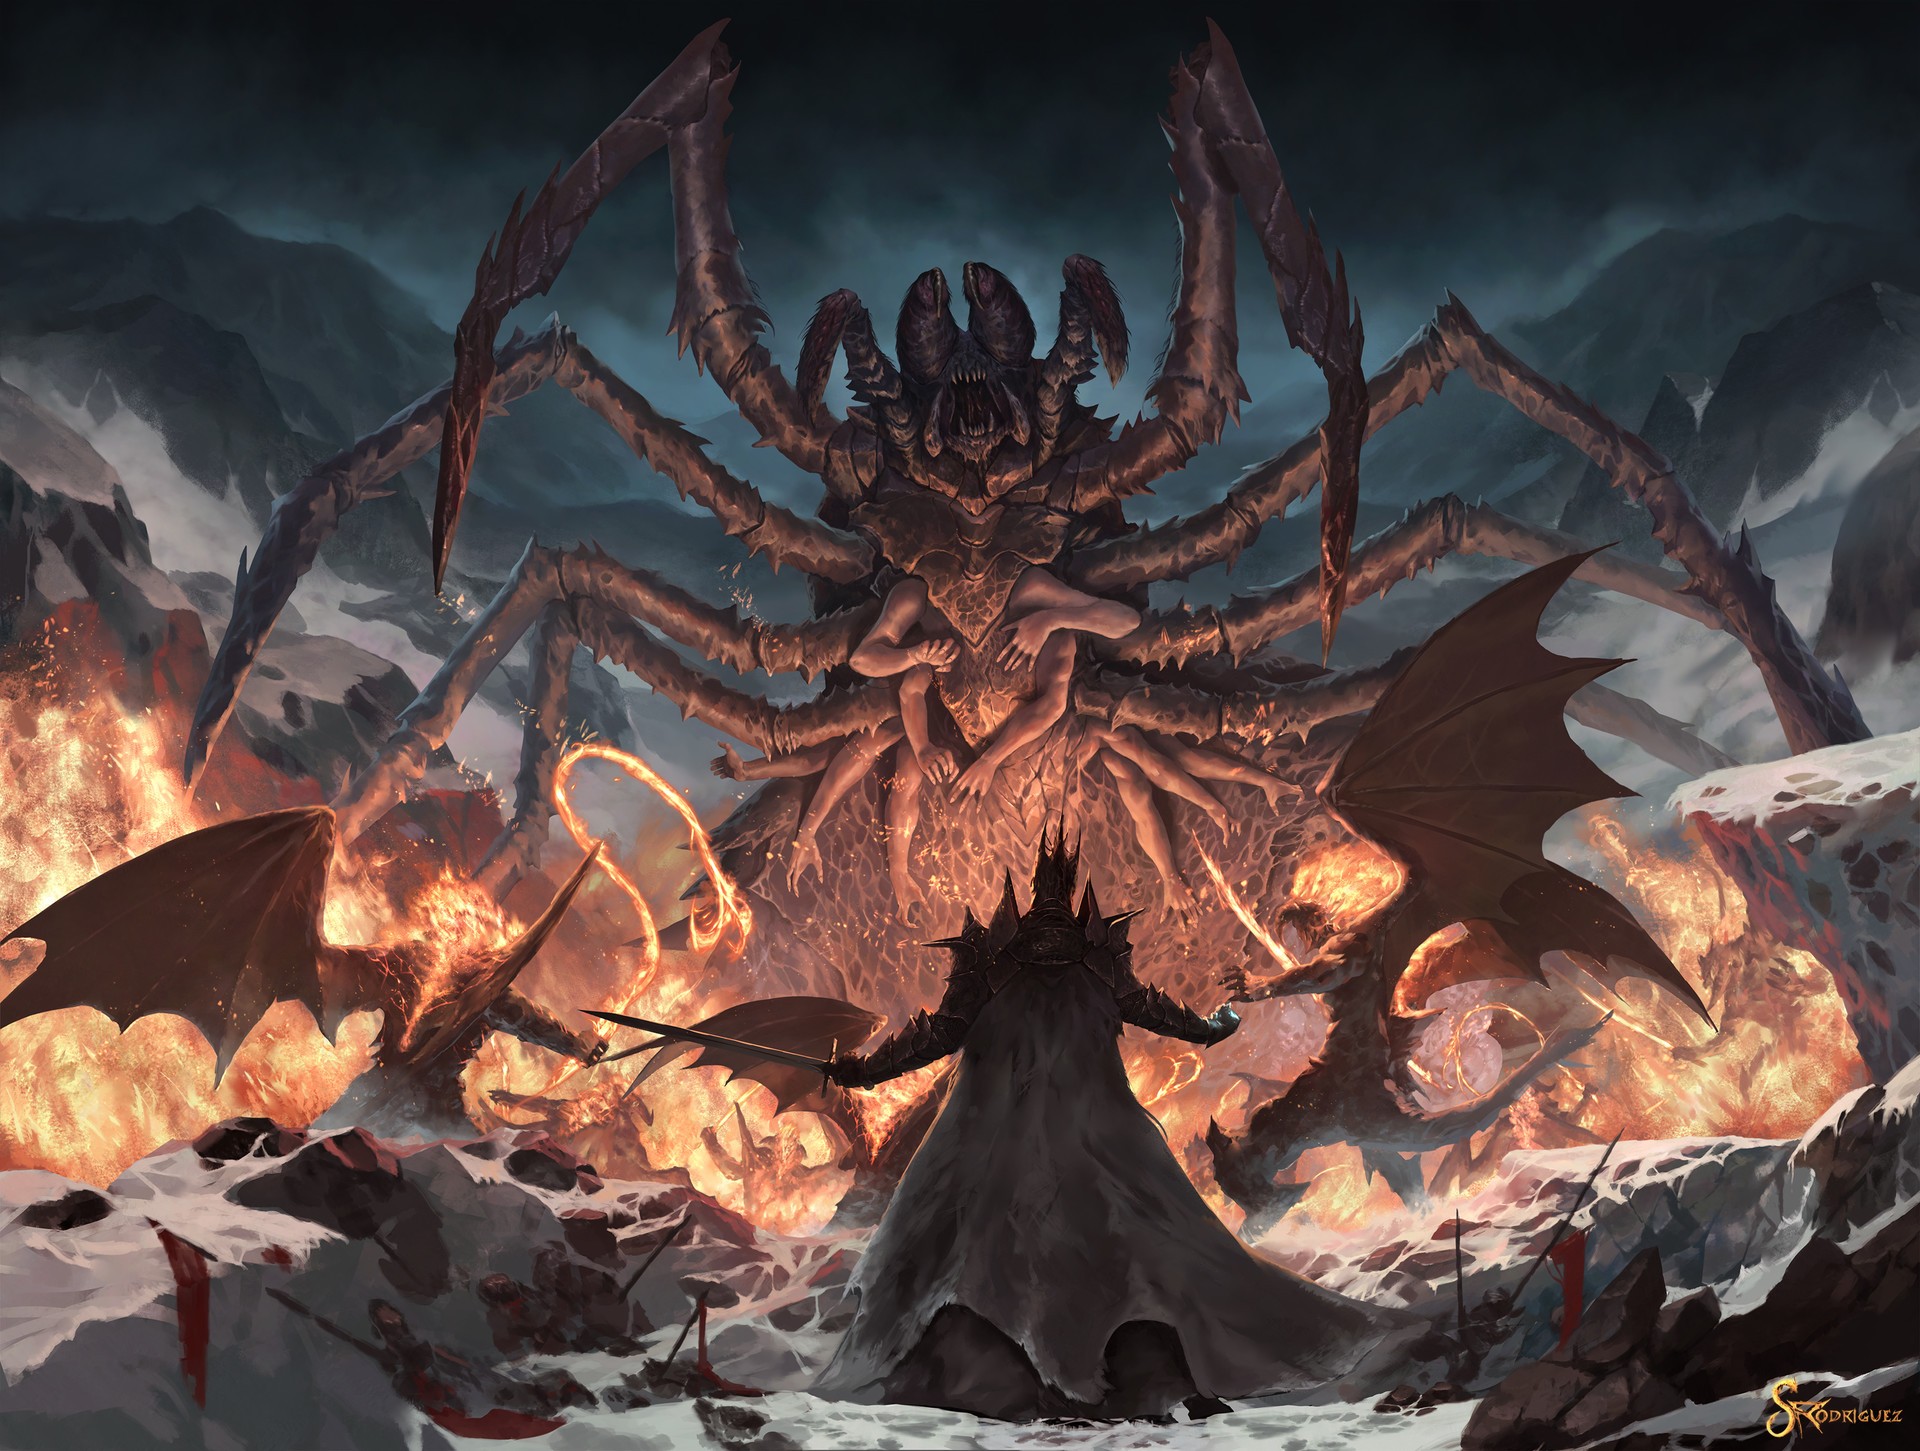 Fan Art Demon Balrog J R R Tolkien Melkor Morgoth The Lord Of The Rings Ungoliant 1920x1451